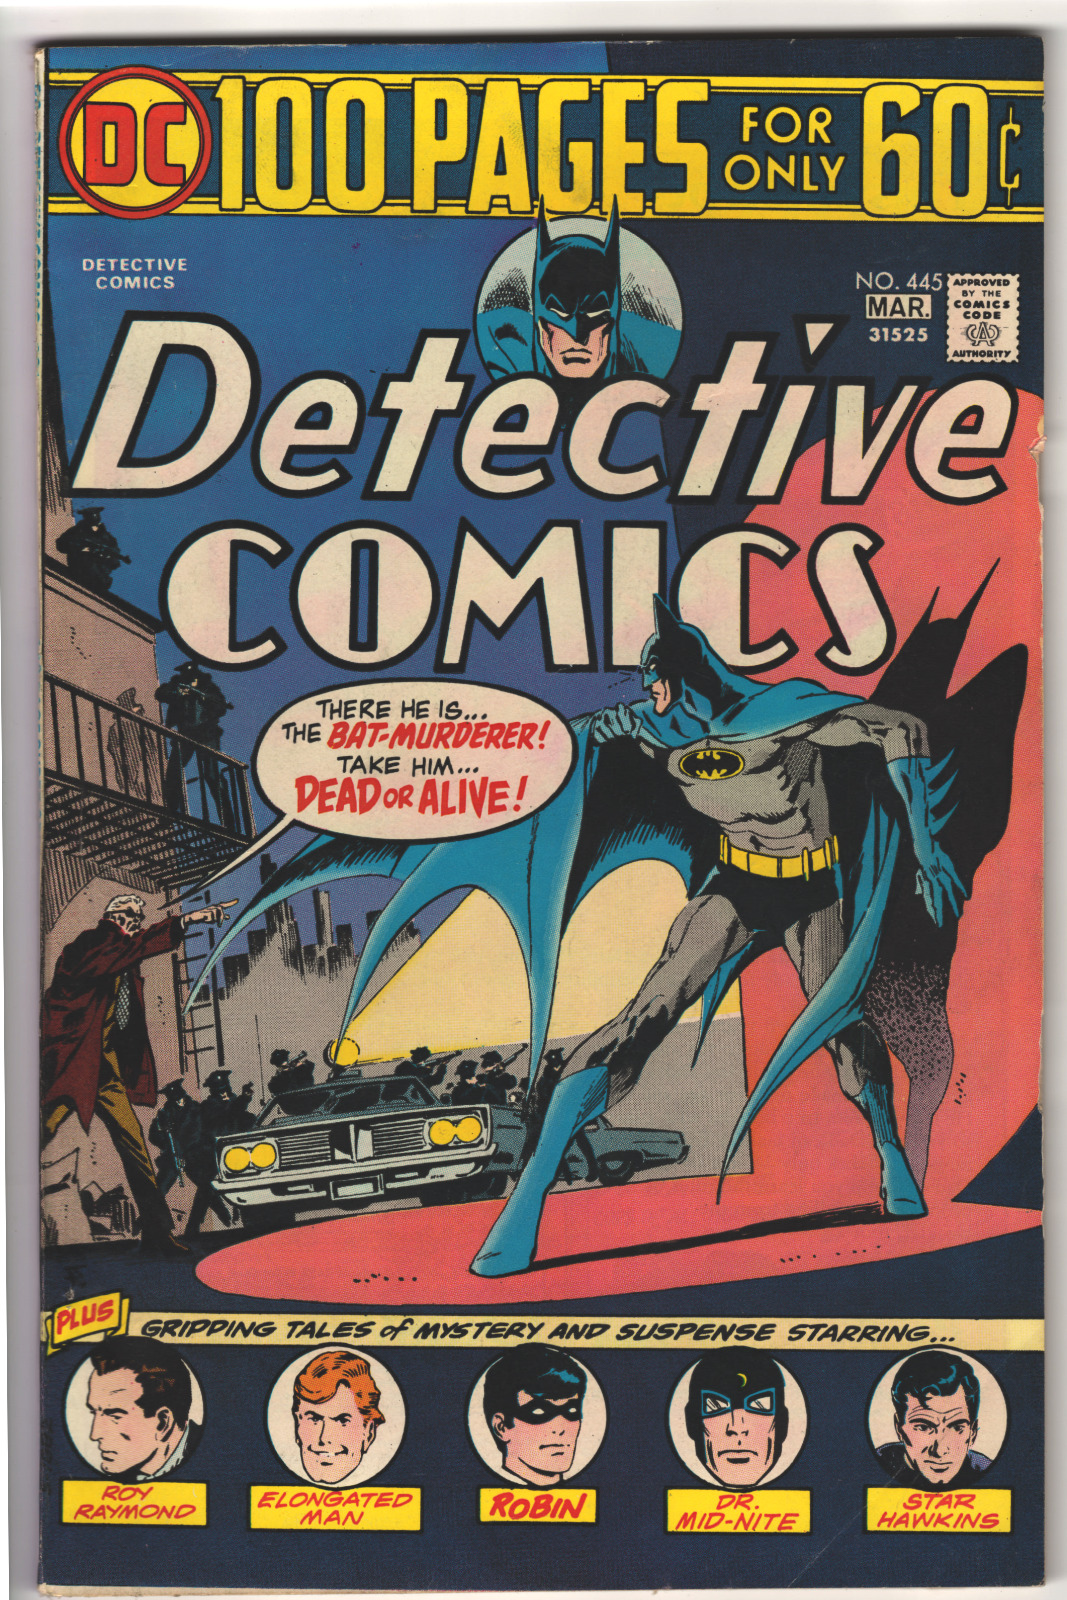 Detective Comics # 445 - 6.5 1975 100 pages Off White / Creme Pages